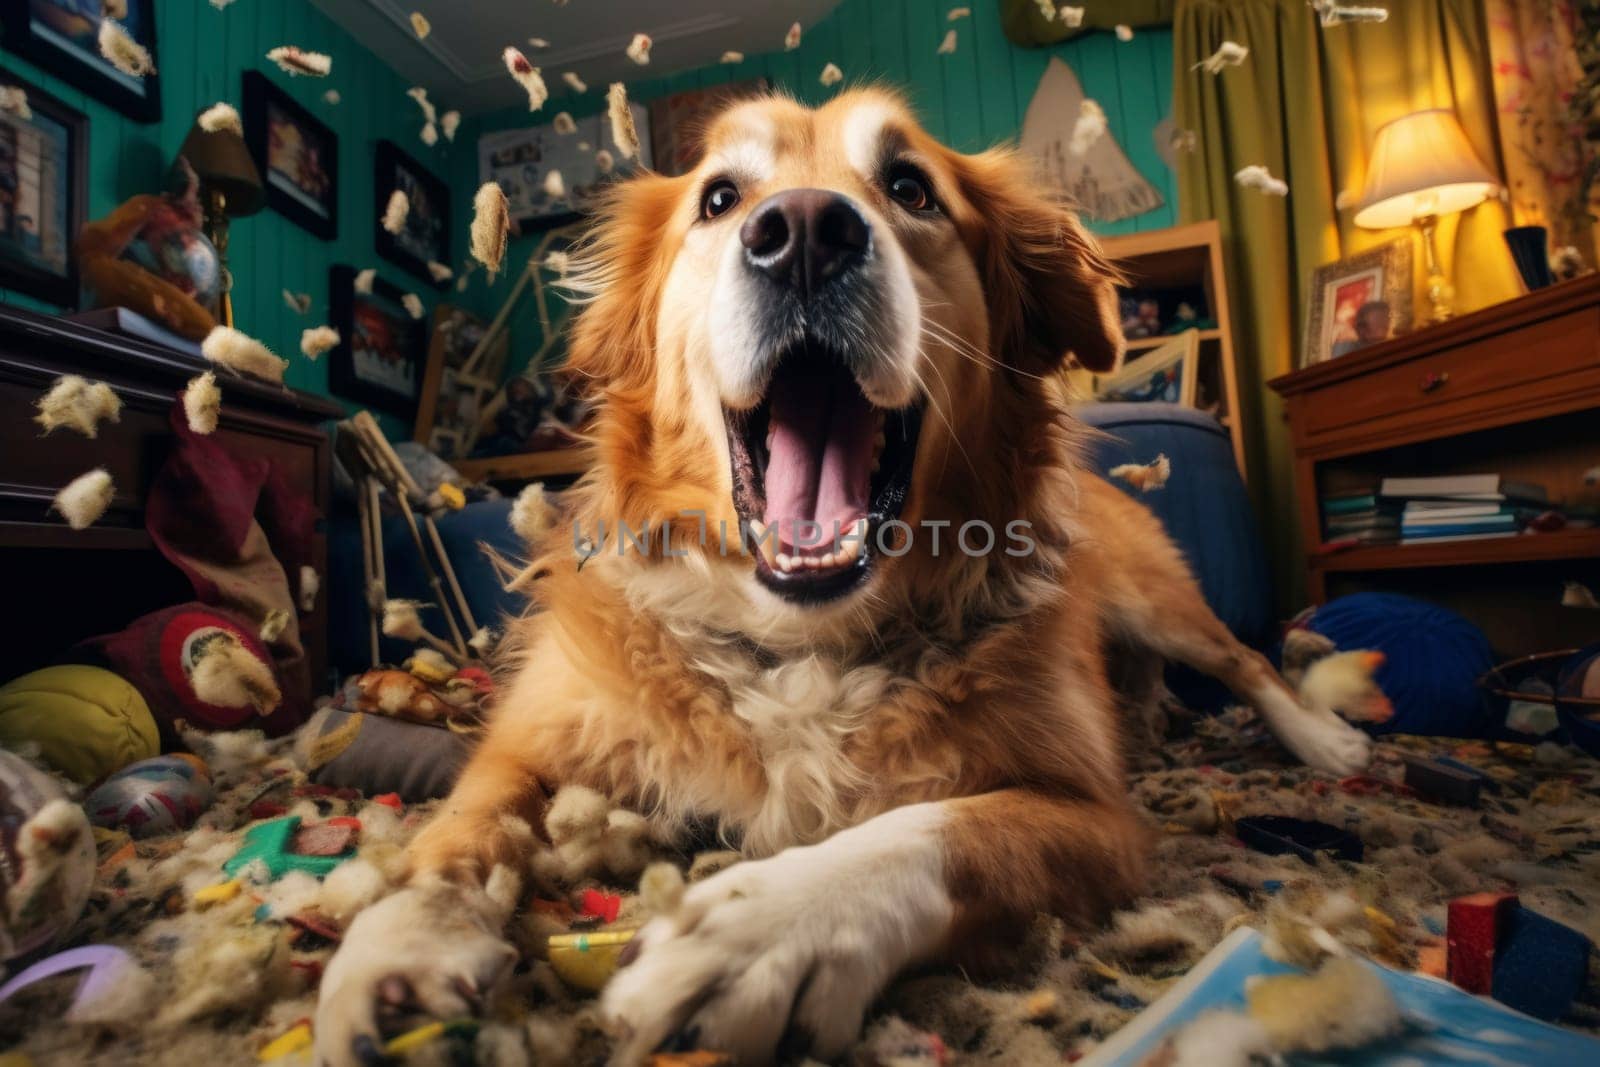 Happy dog surrounded by torn toys, a comical mess.